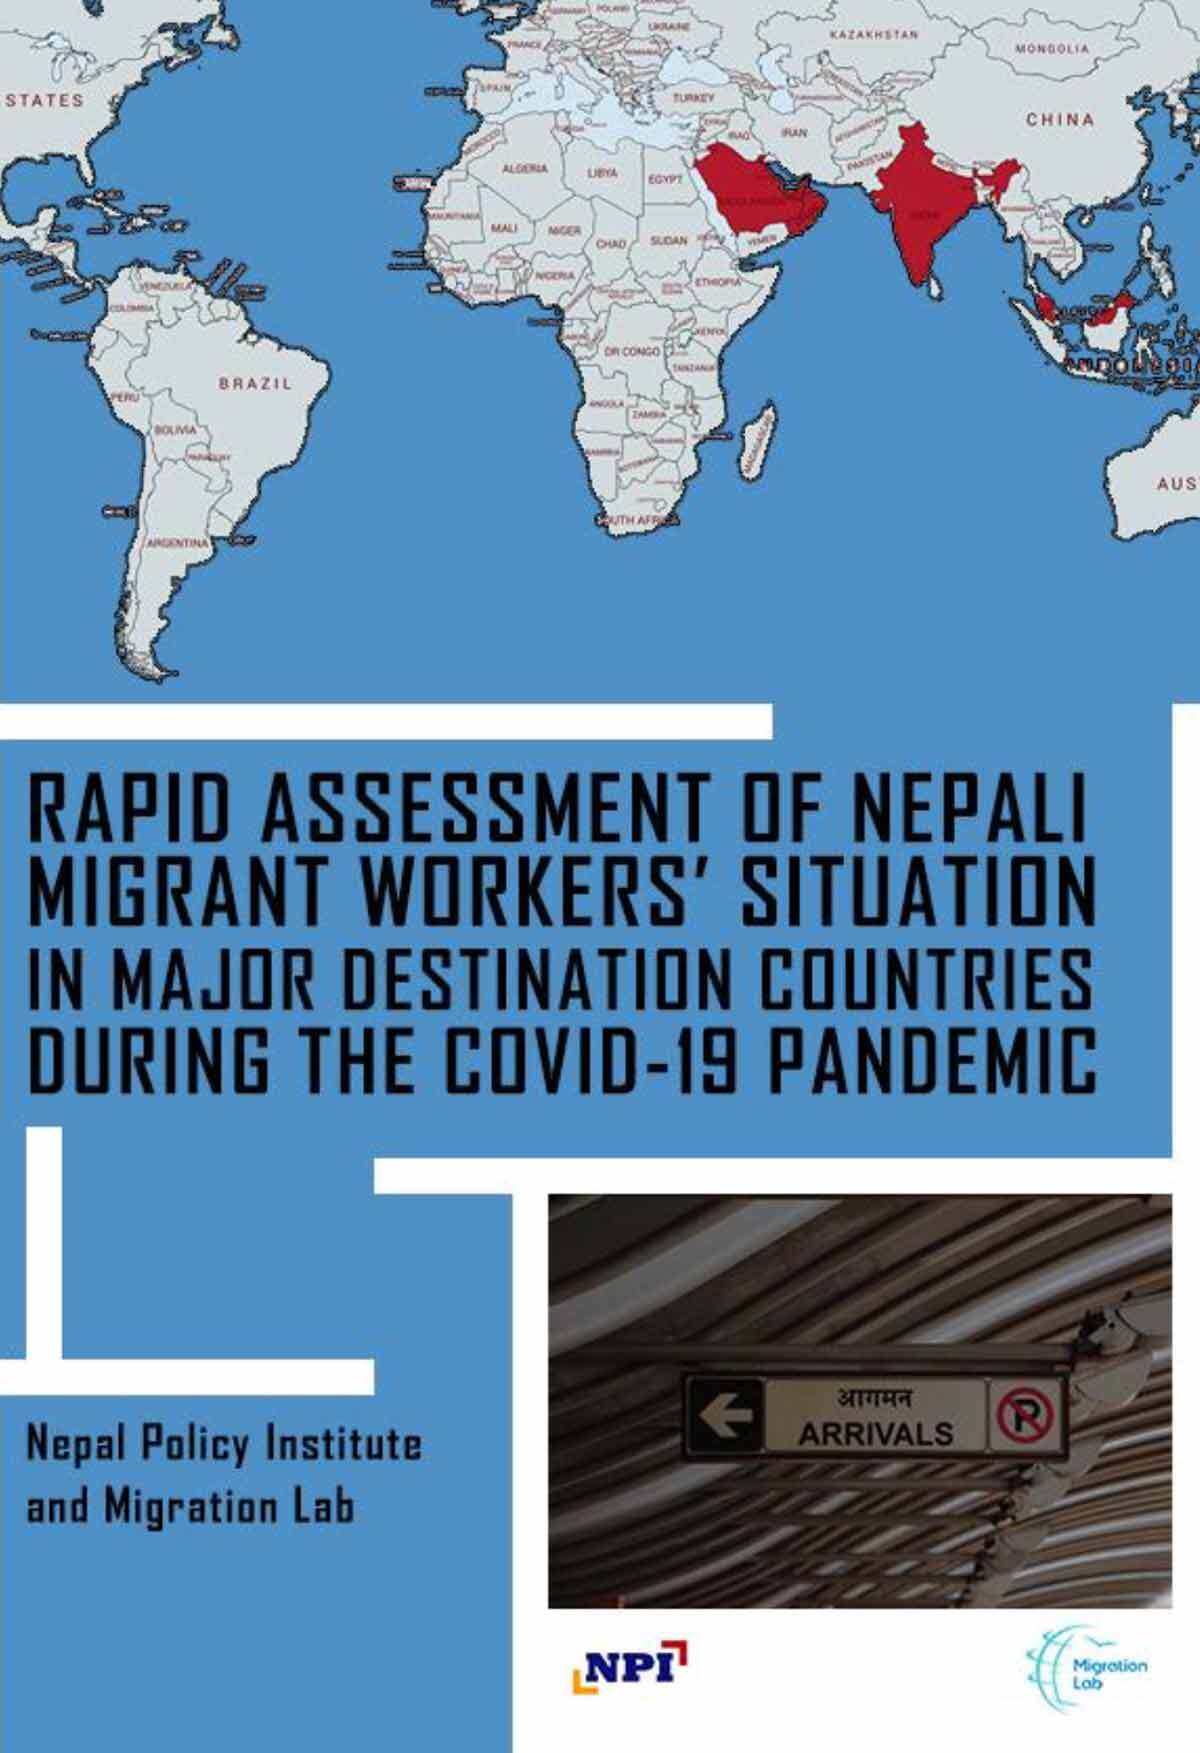 impact of migration in nepali society essay